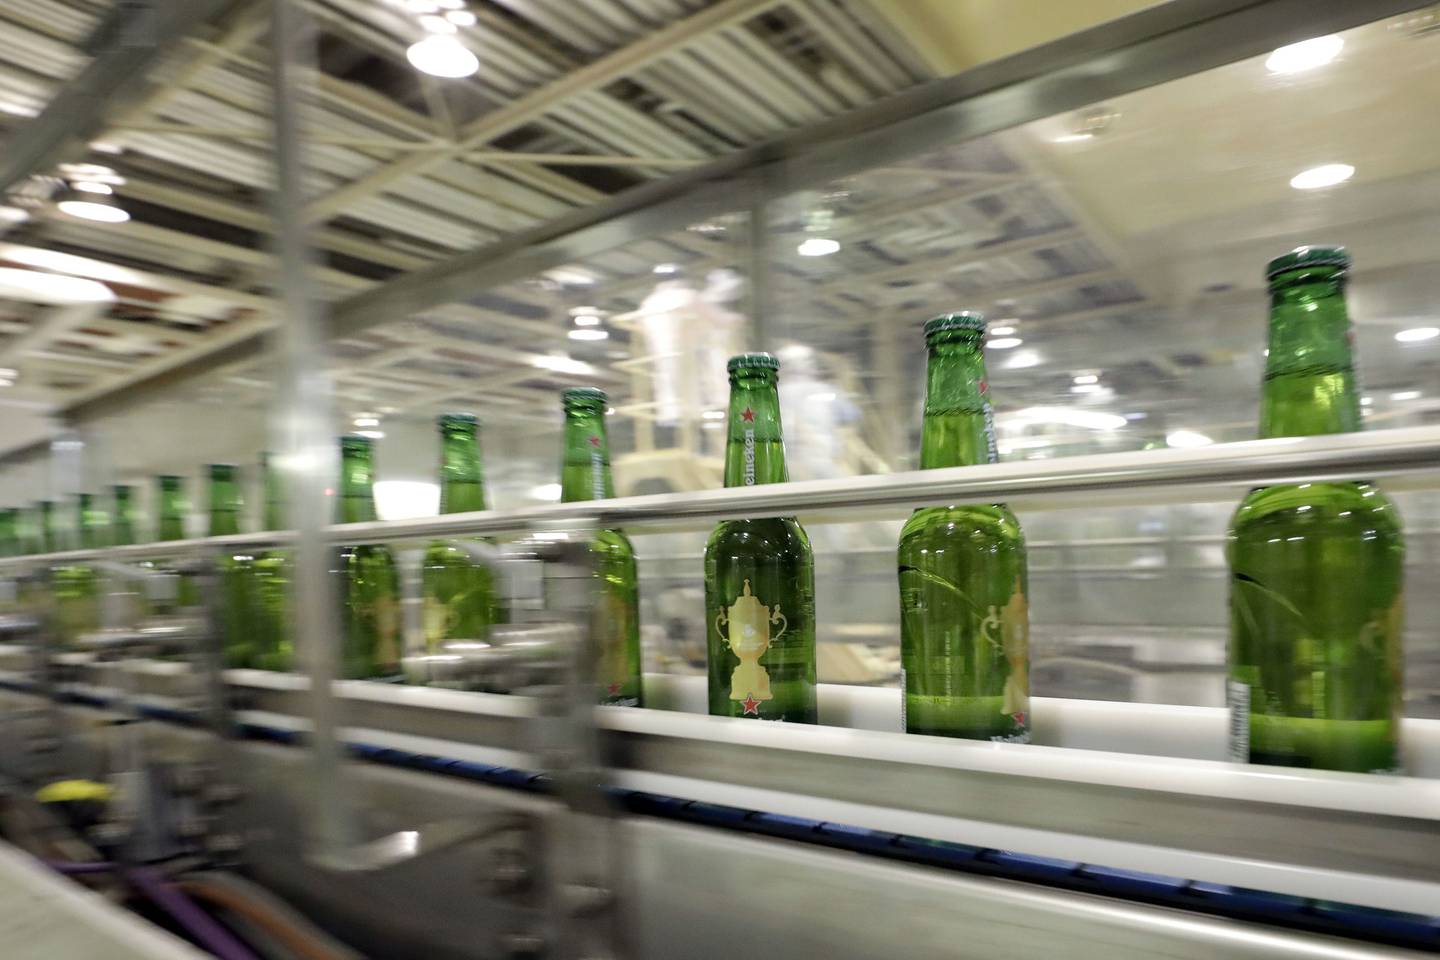 First-half beer volumes rose 7.6% on an organic basis, better than the 5.73% average analyst estimate, the Dutch brewer said in a statement Monday (August 1).